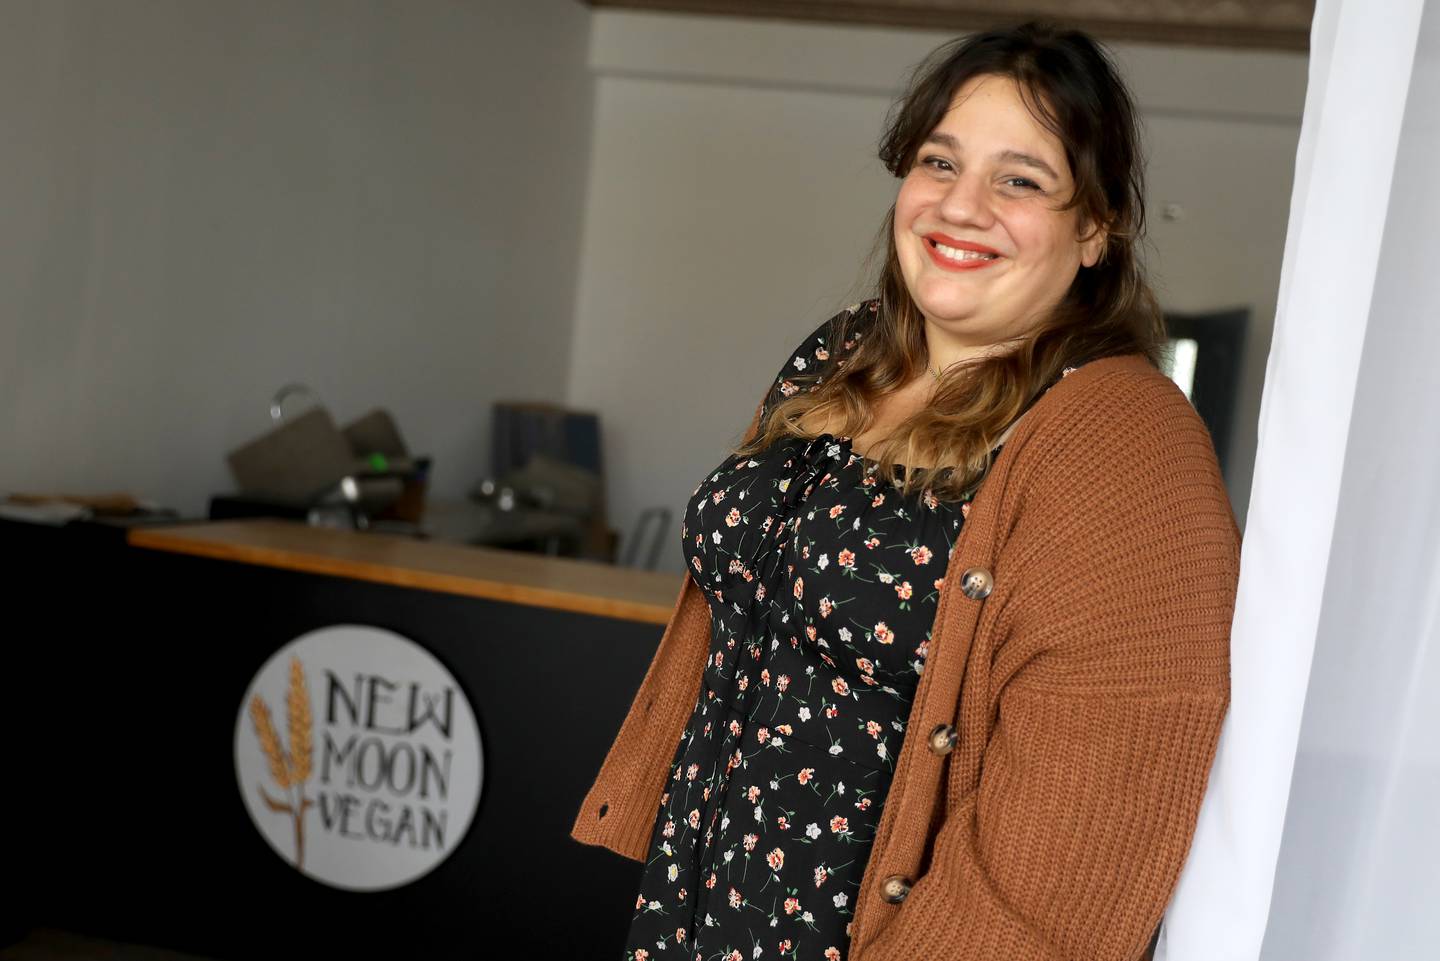 Jo Colagiacomi plans to open her New Moon Vegan bakery and cafe at 119 S. Batavia Ave. in Batavia. Colagiacomi is currently renovating her new brick and morter location after being a part of the city’s Boardwalk Shops.